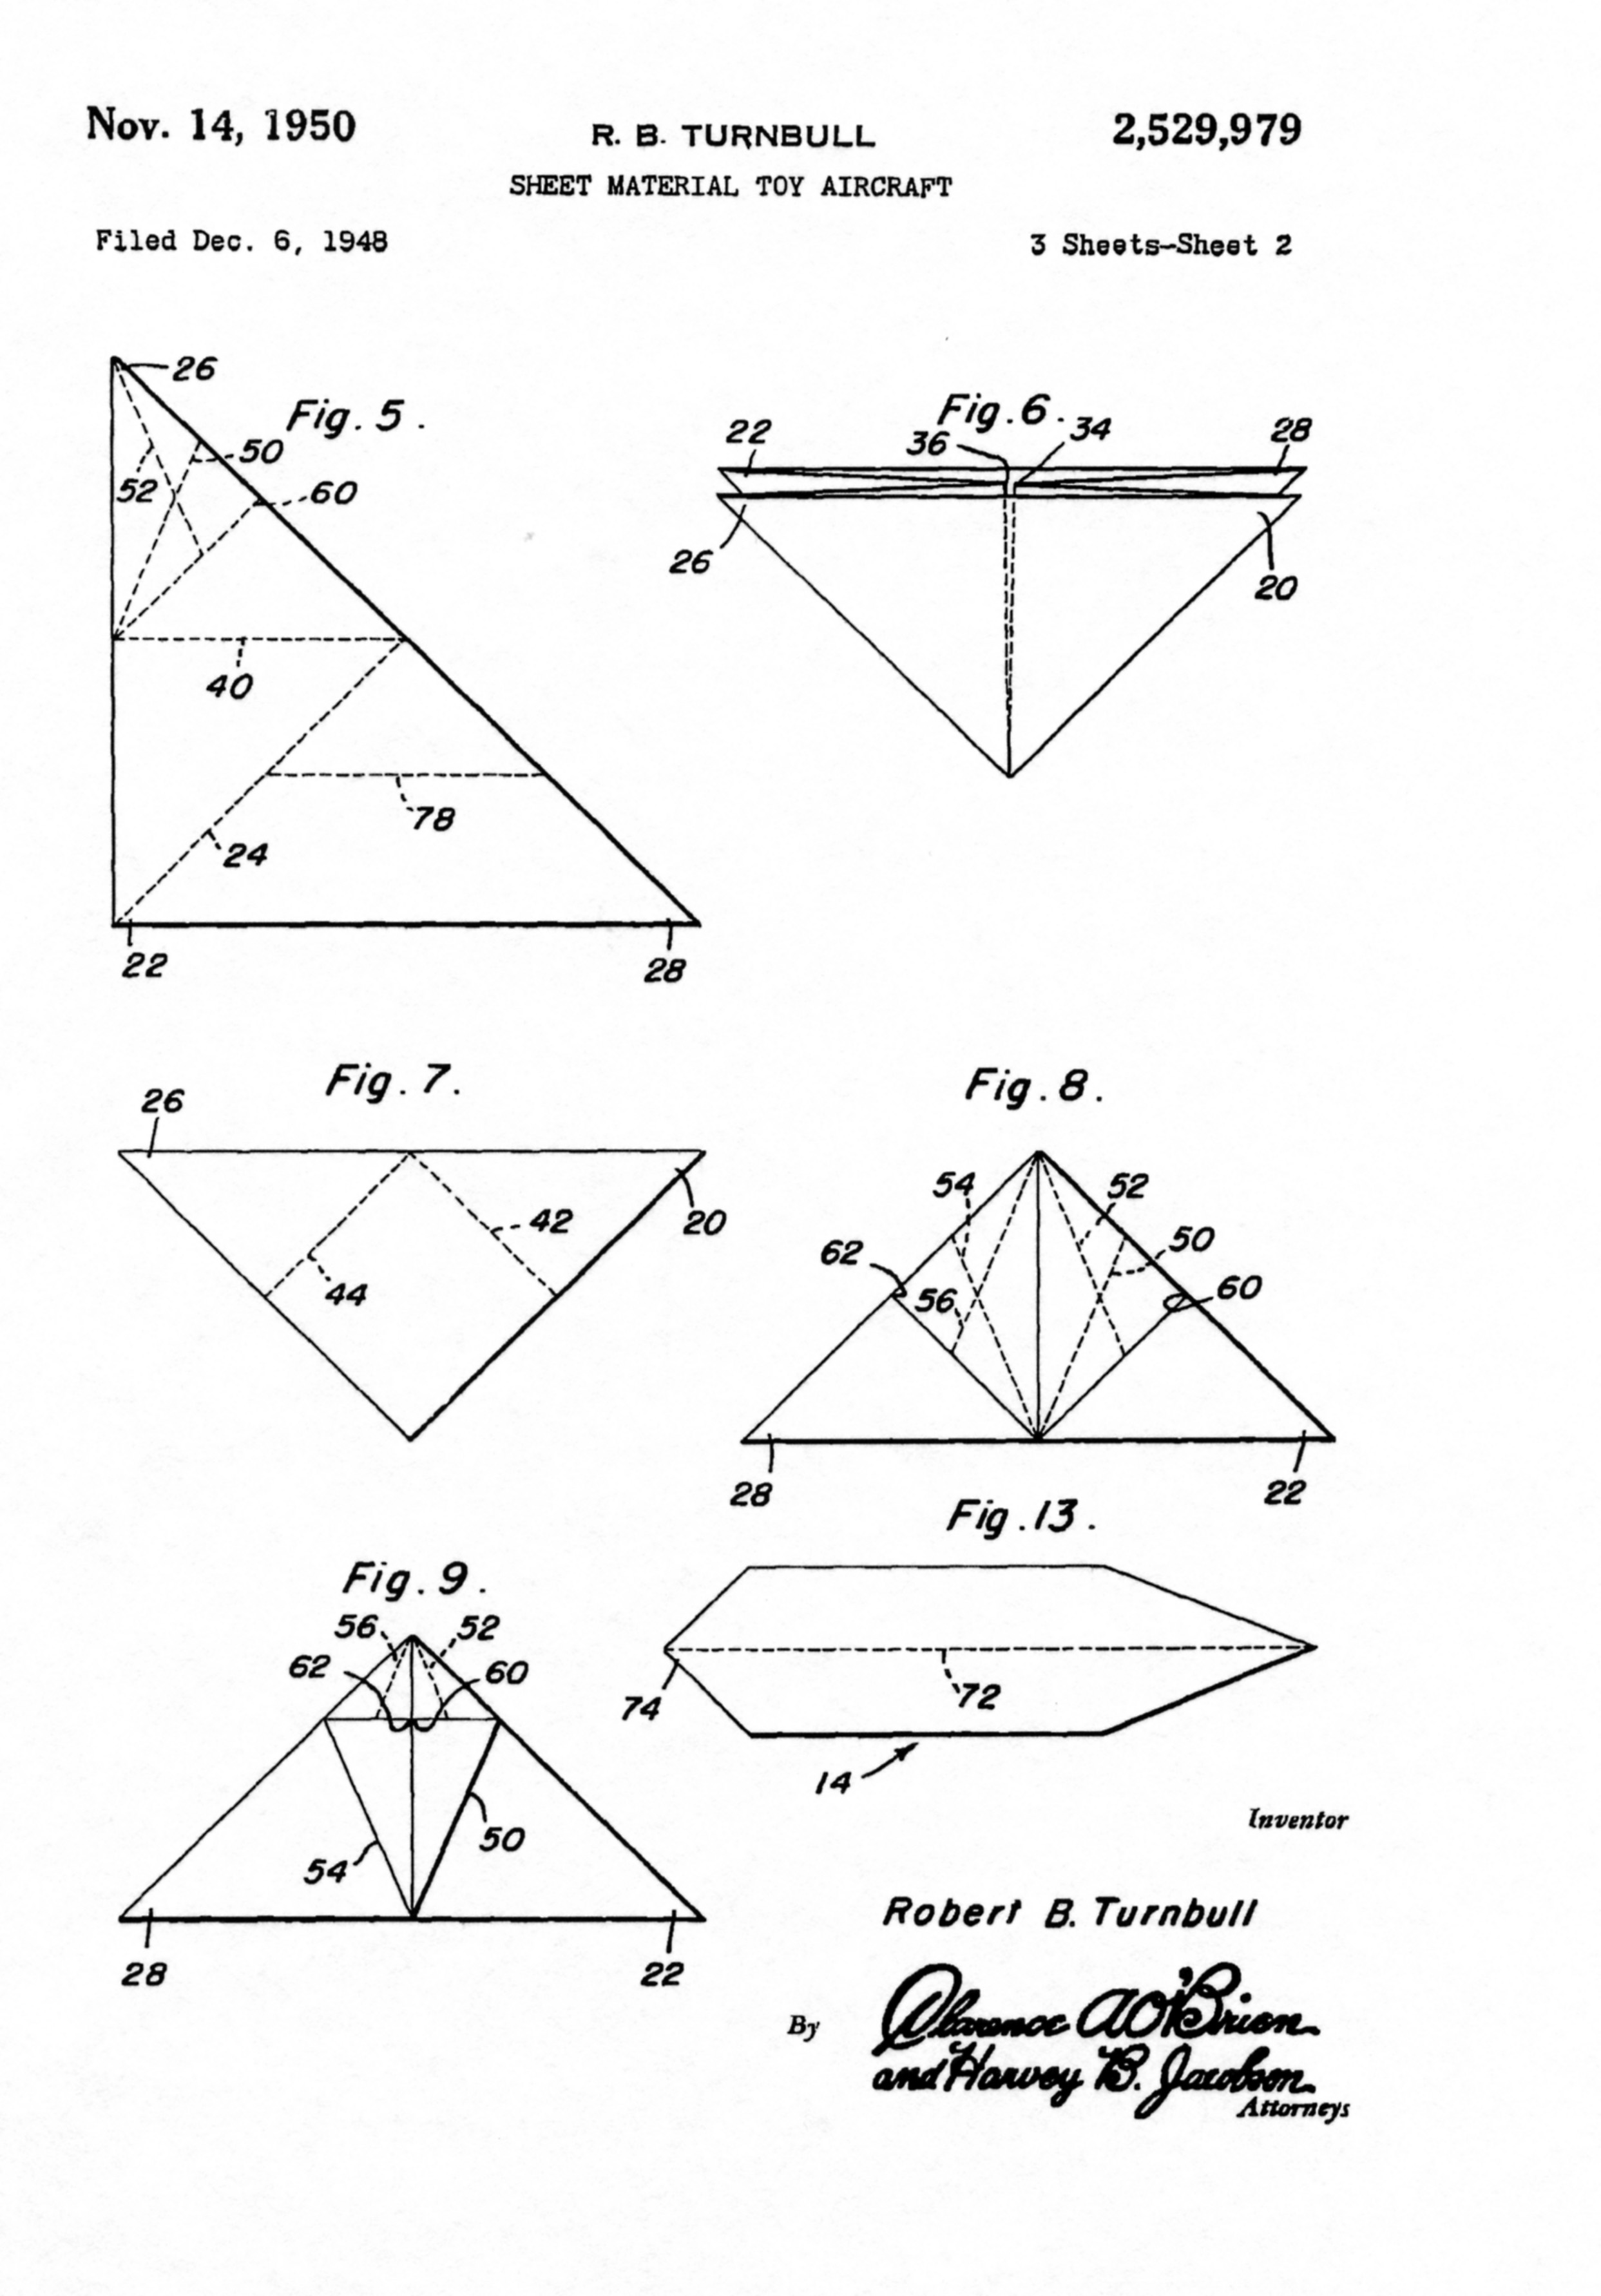 Patent for Turnbull Sheet Metal Toy Airplane page 2